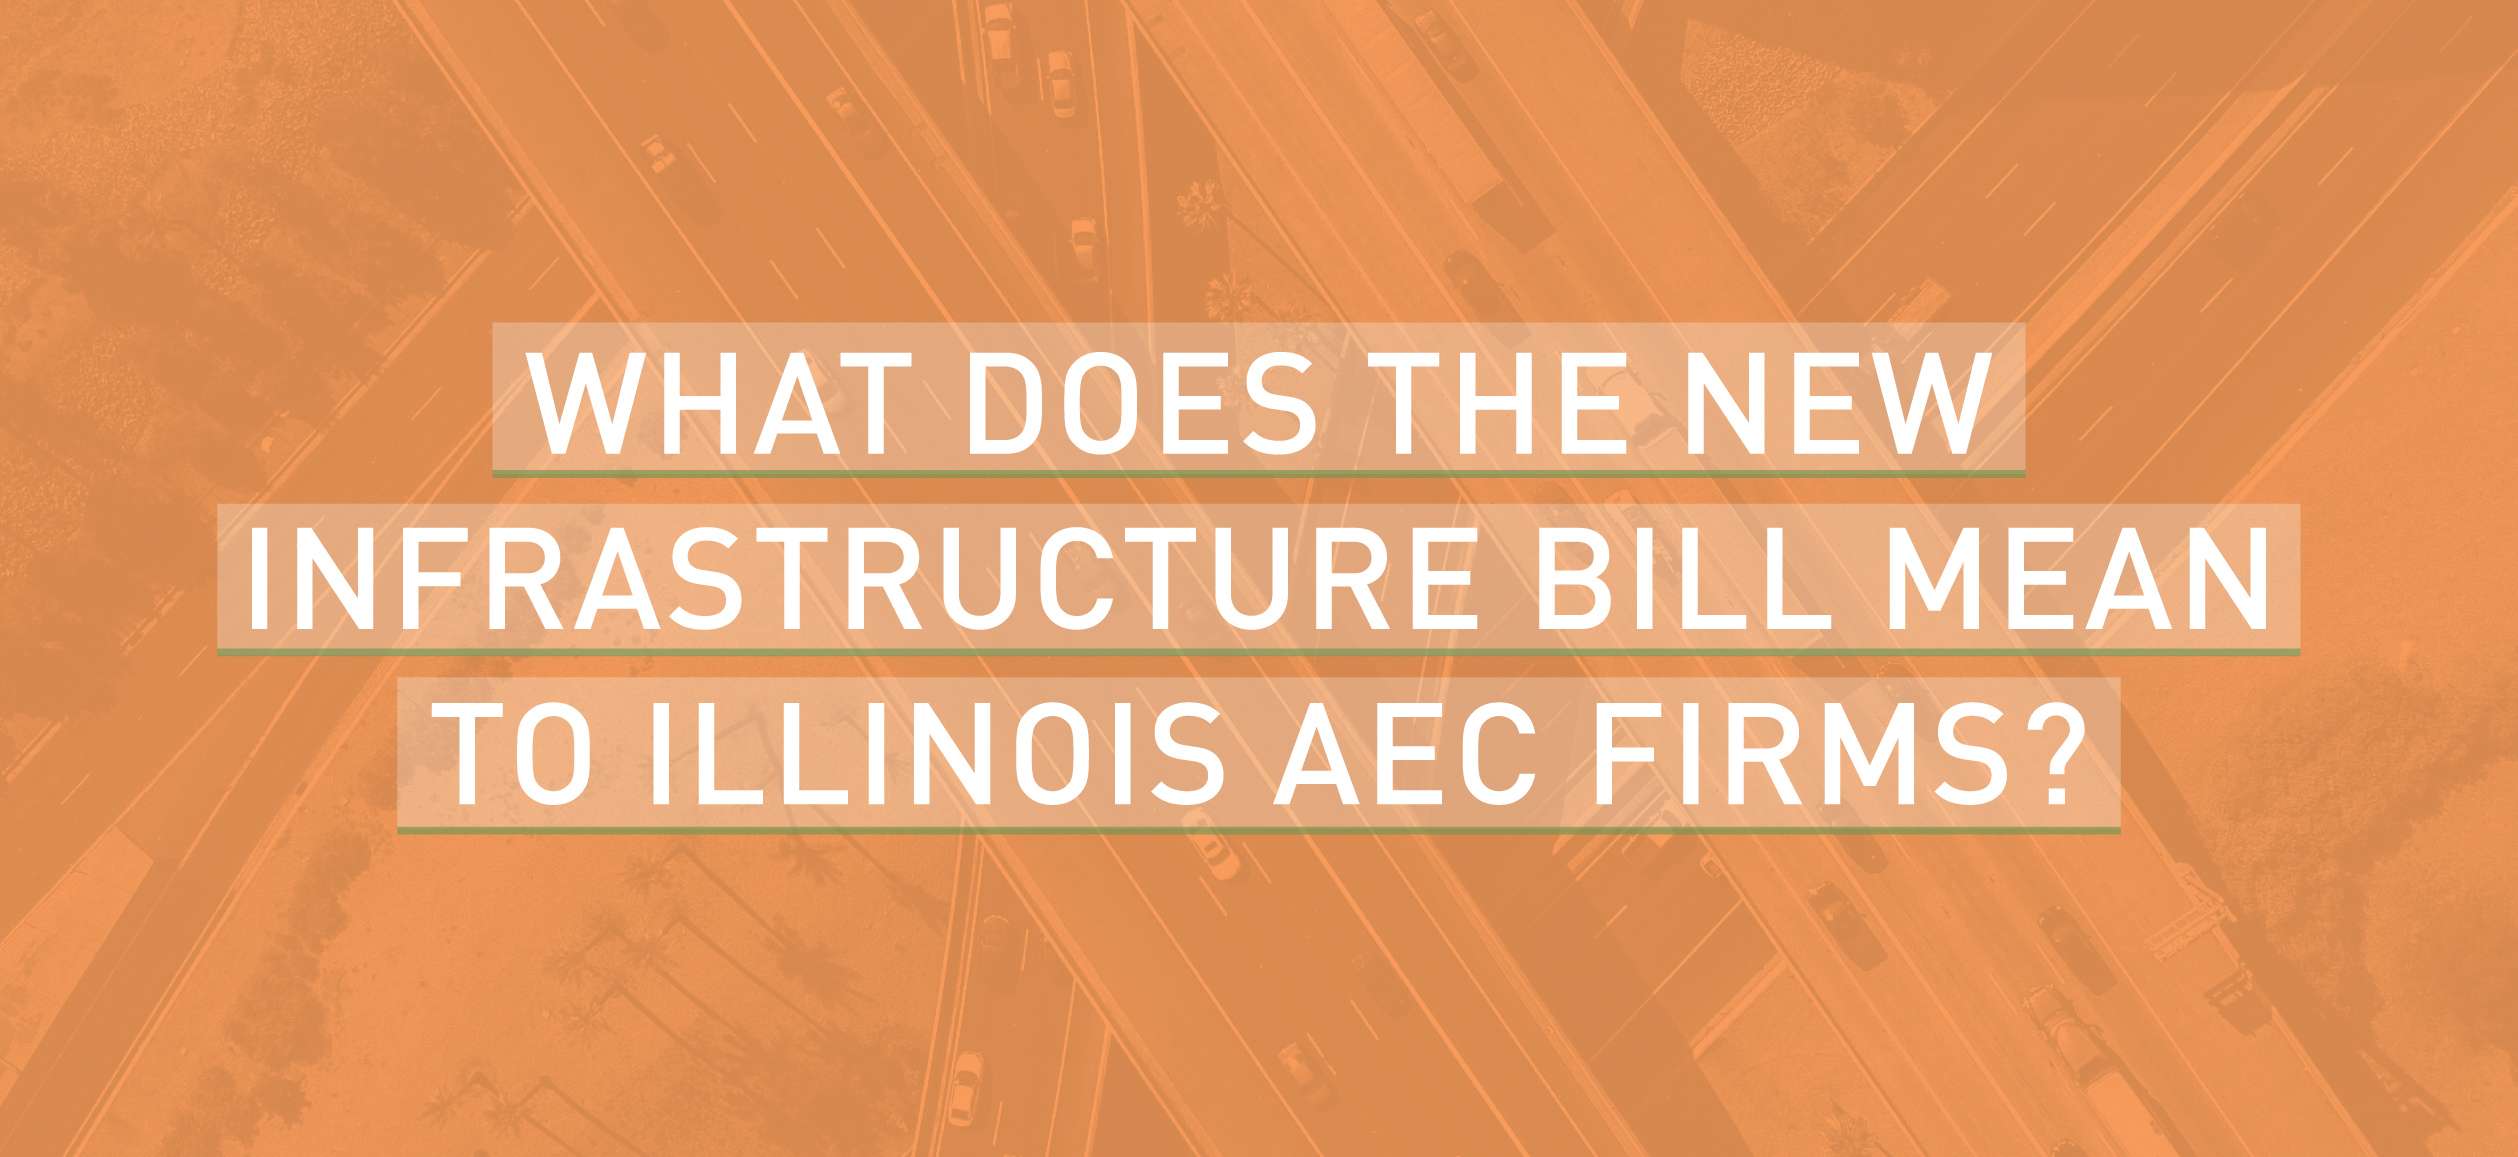 What Does the New Infrastructure Bill mean to Illinois AEC Firms?